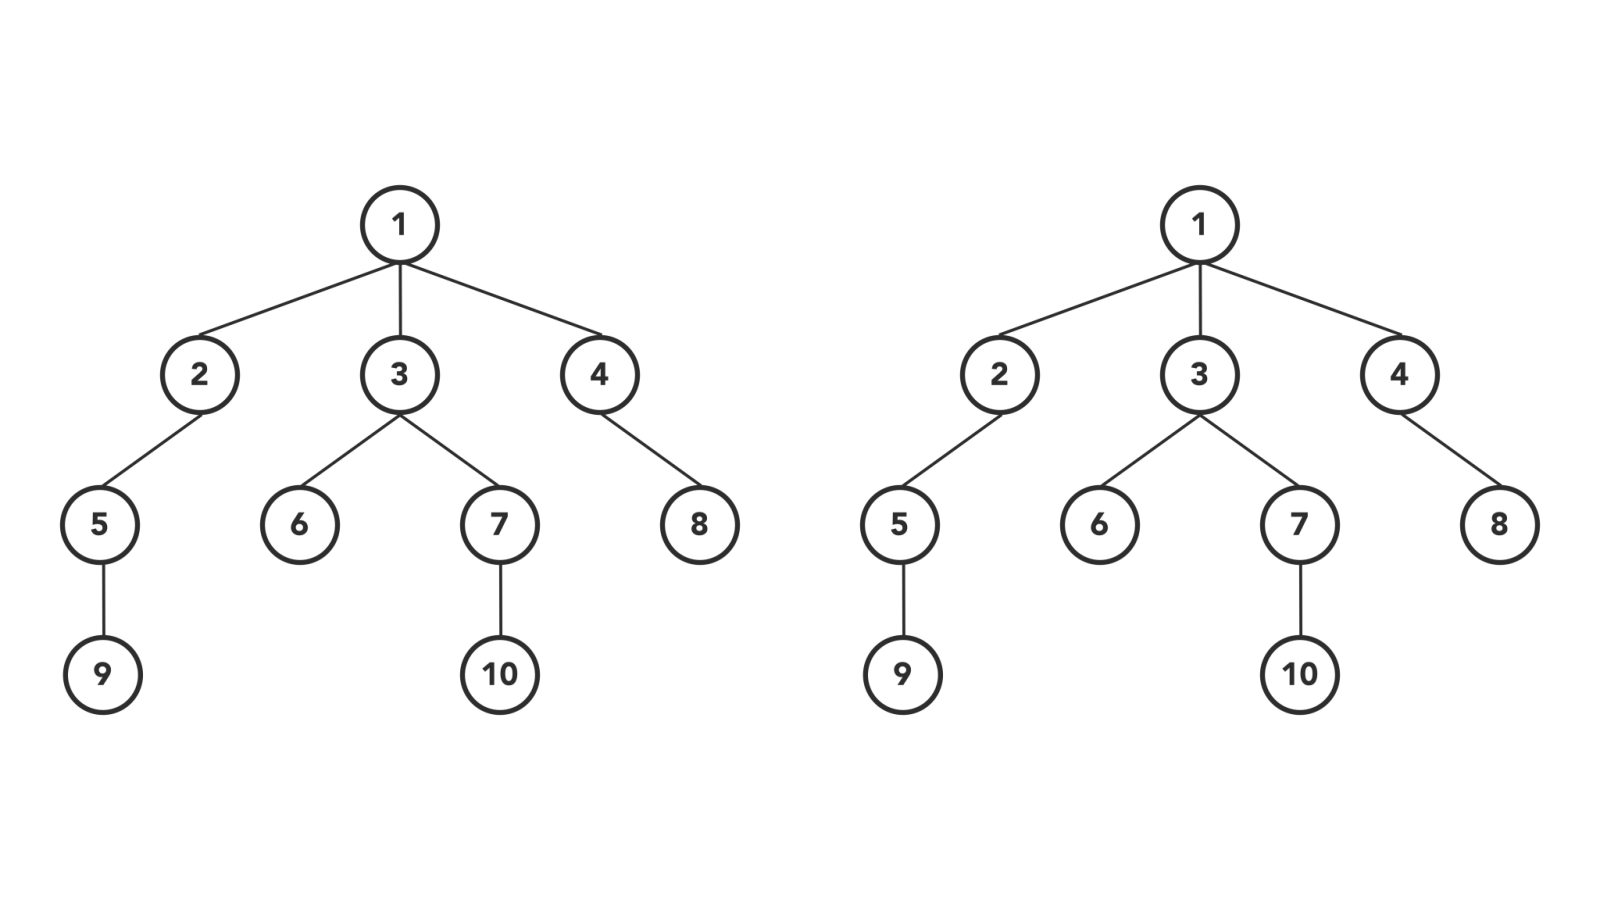 4 Types of Tree Traversal Algorithms, by Anand K Parmar